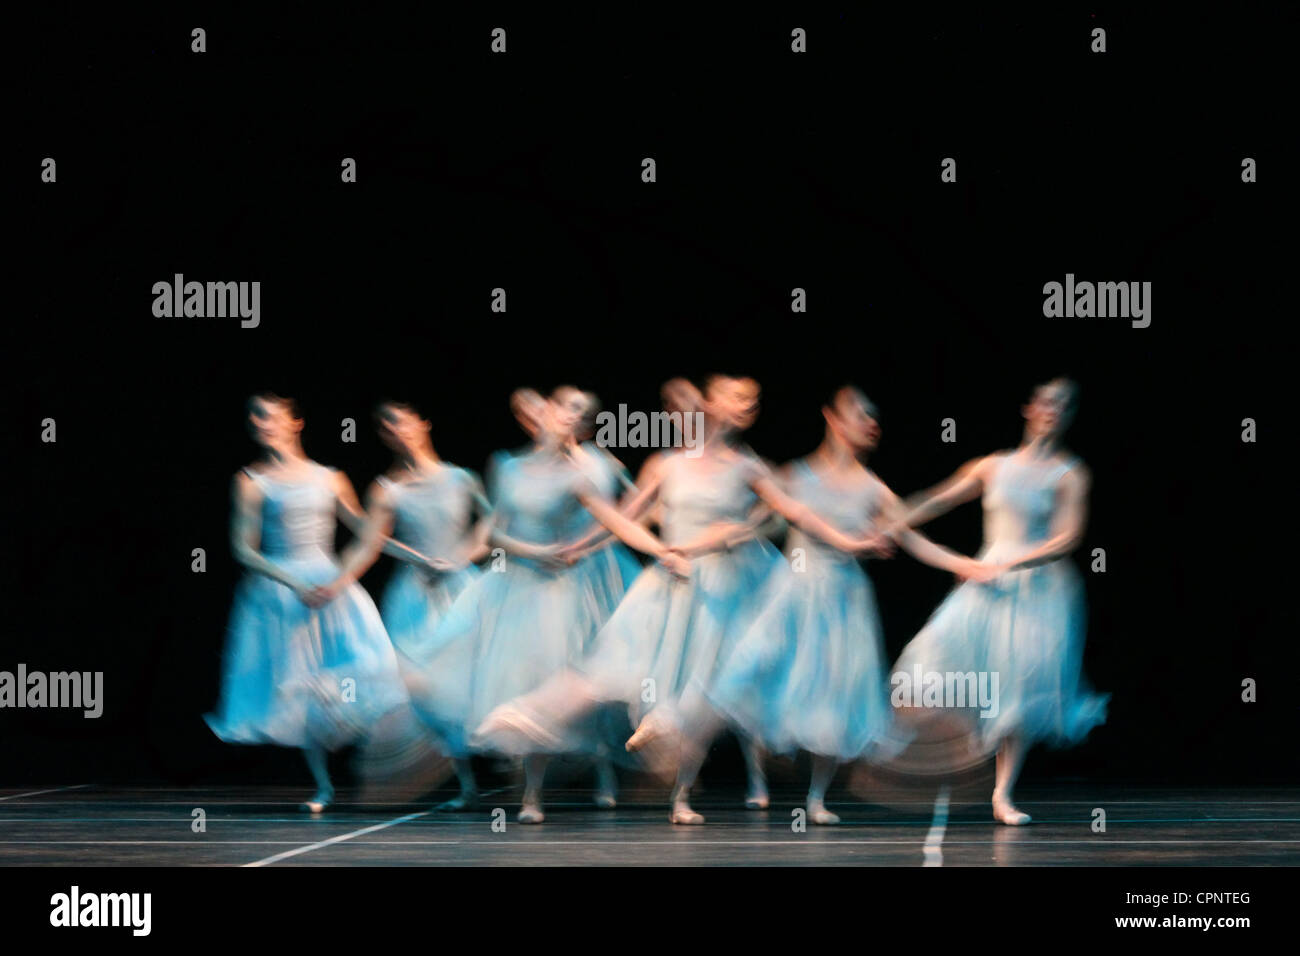 Ballet dancers perform on stage. Stock Photo